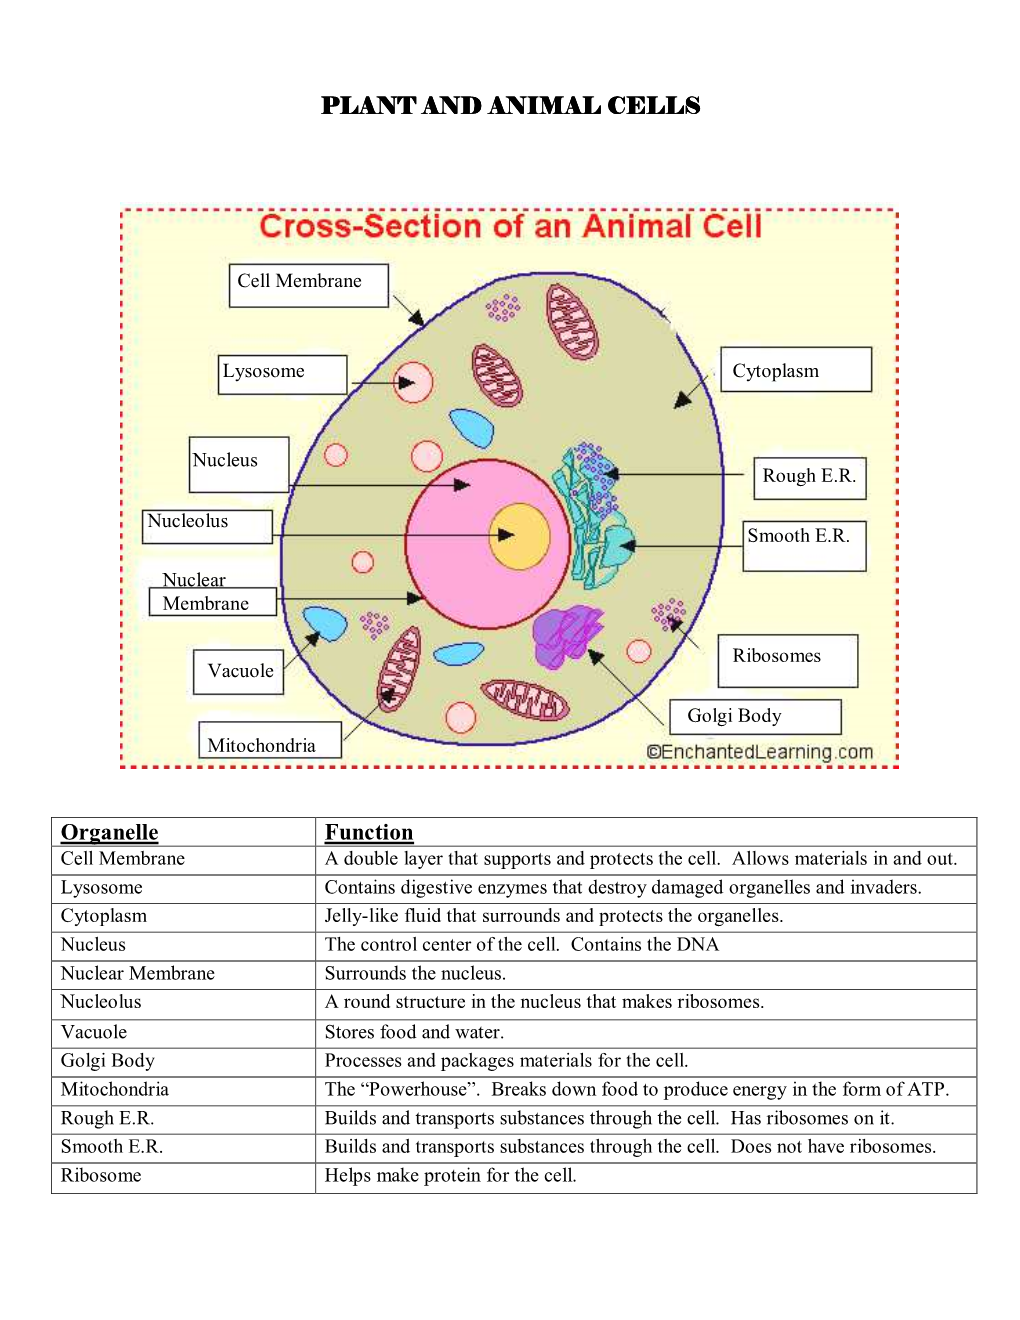 Plant and Animal Cells?